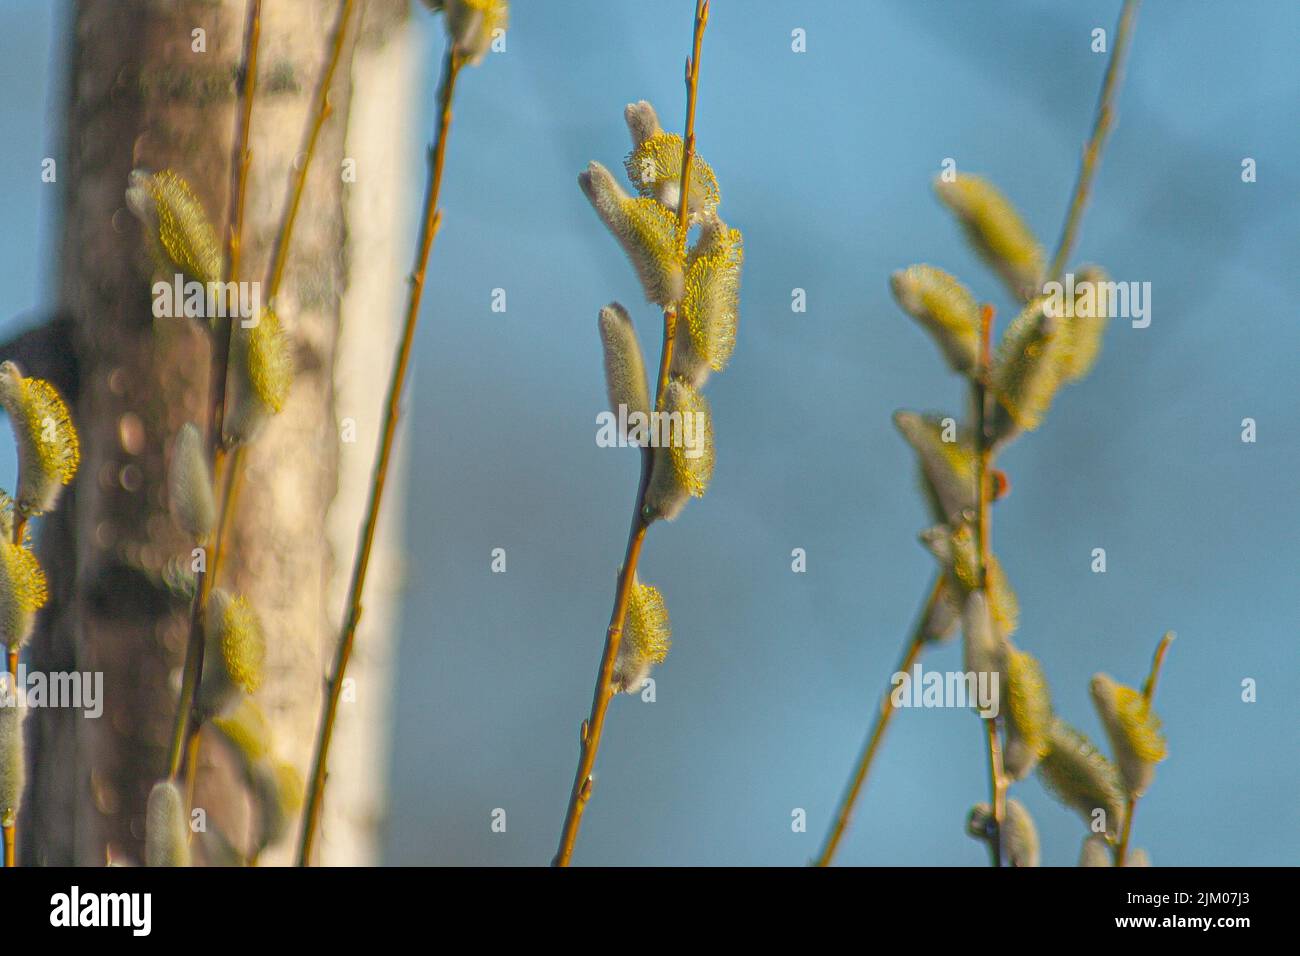 A closeup shot of fuzzy willow tree branches Stock Photo